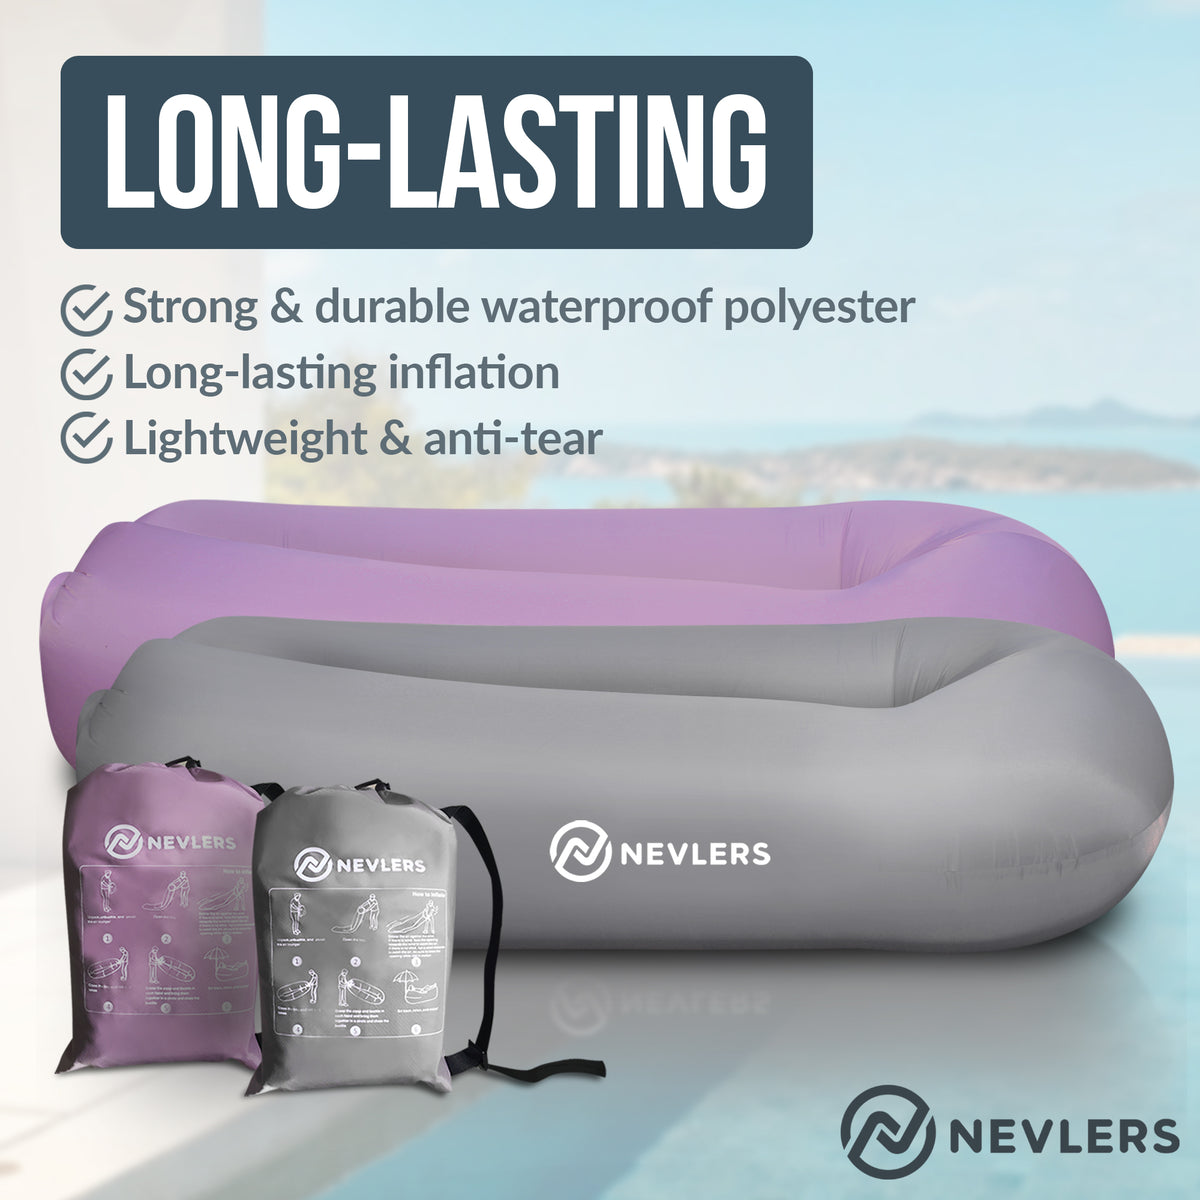 Inflatable Loungers - Lavender/Gray - 2 Pack